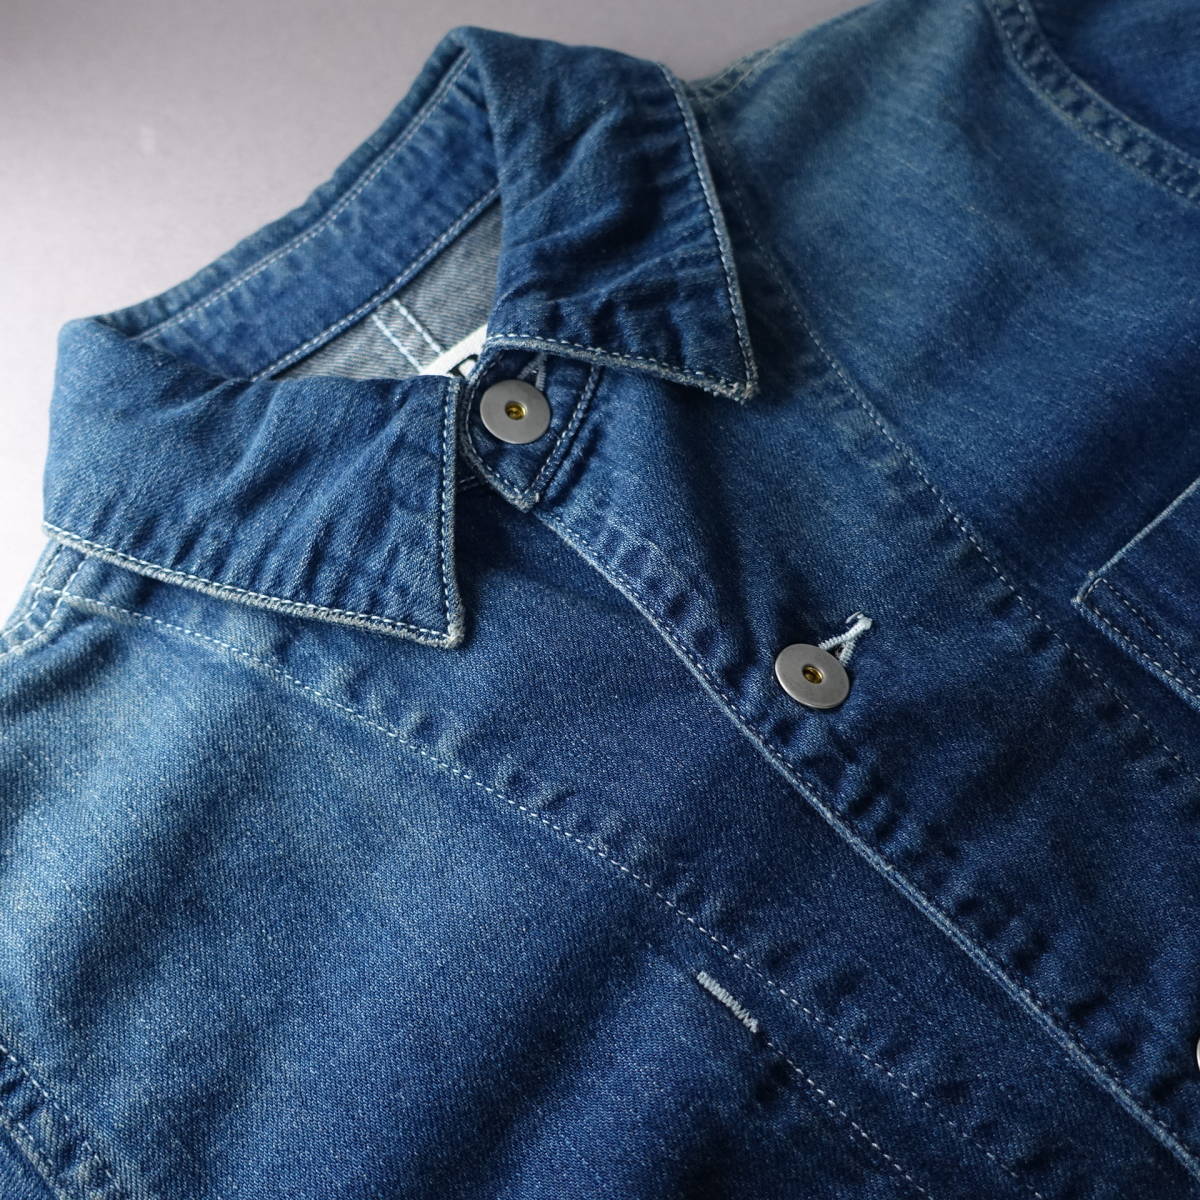 INSCRIRE/ Anne s clear / made in Japan / Denim jacket / lady's / tops 